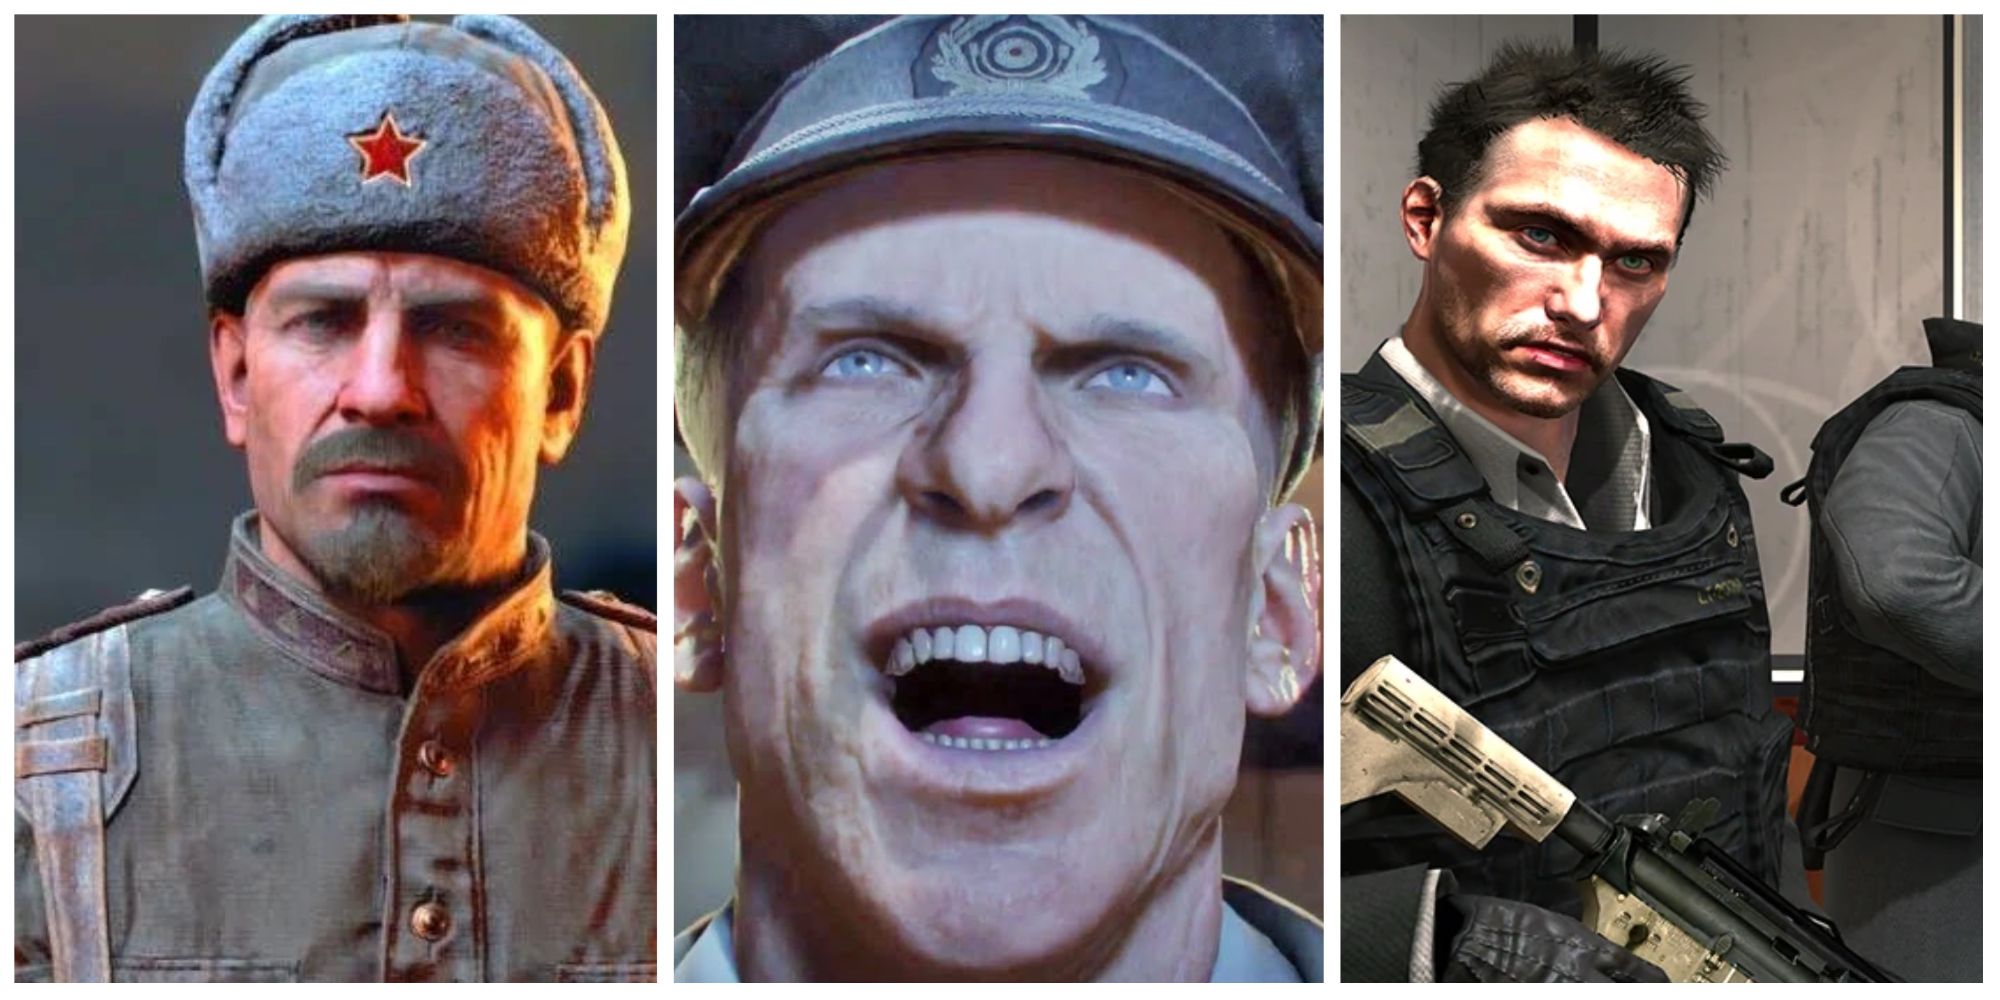 Greatest Call of Duty Characters in History ☆ Top 10 COD Characters